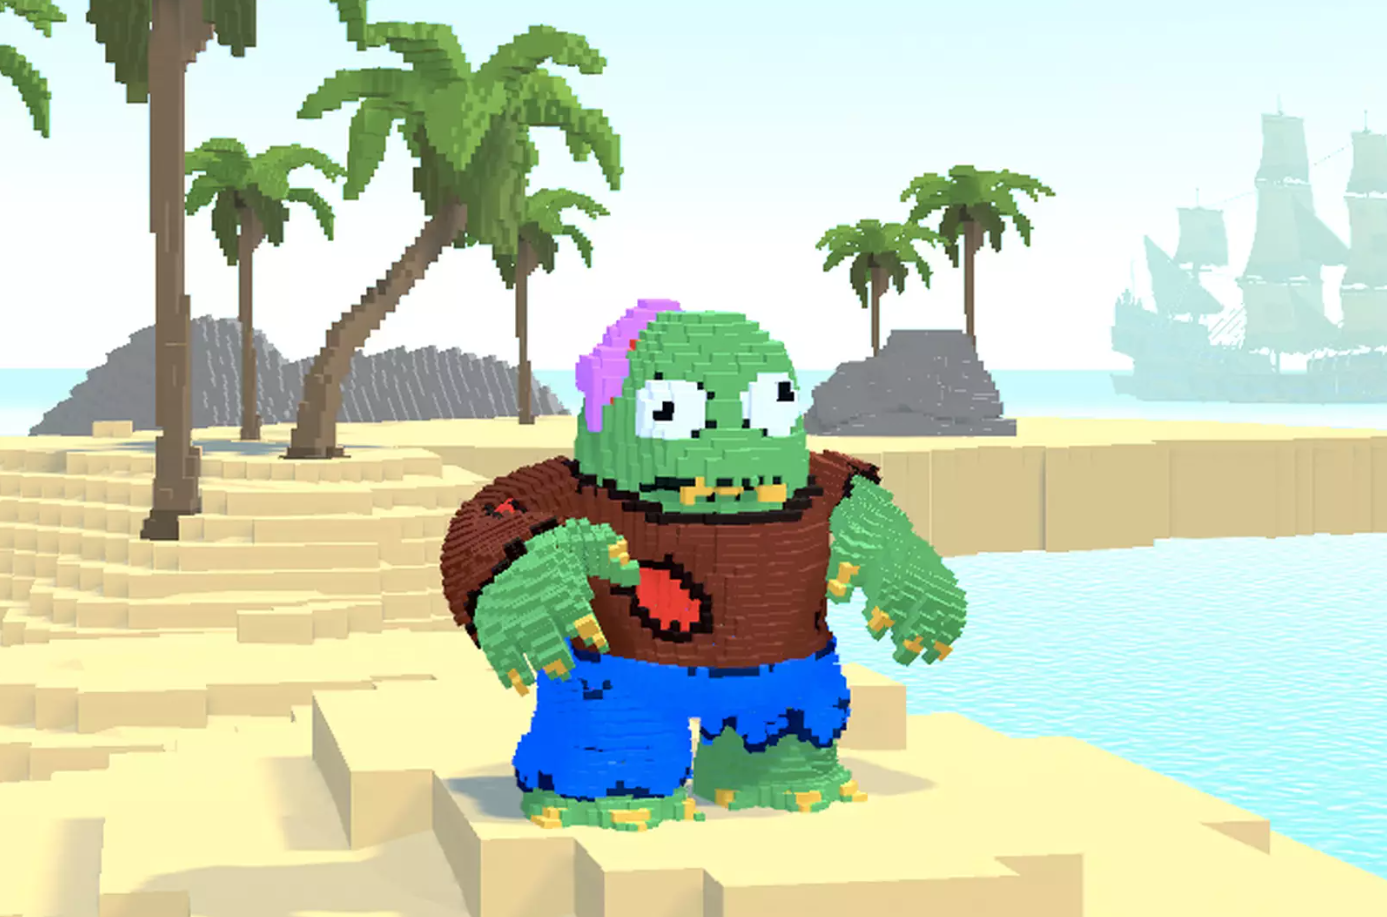 image of the Kevin NFT created by Pixelmon